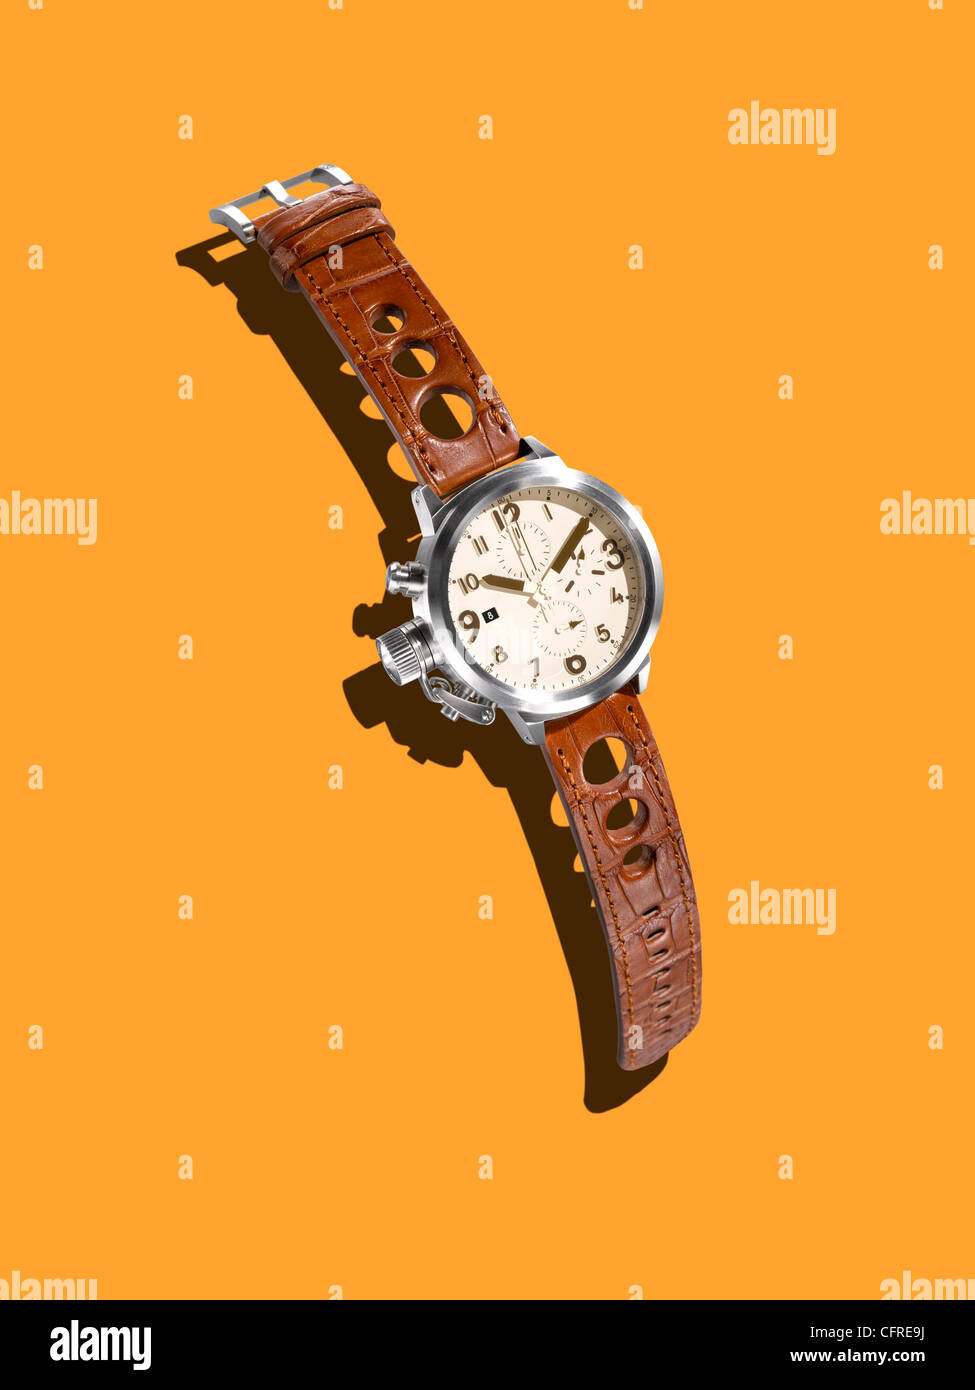 A modern watch with a leather strap on a mustard background with creative shadow. Stock Photo